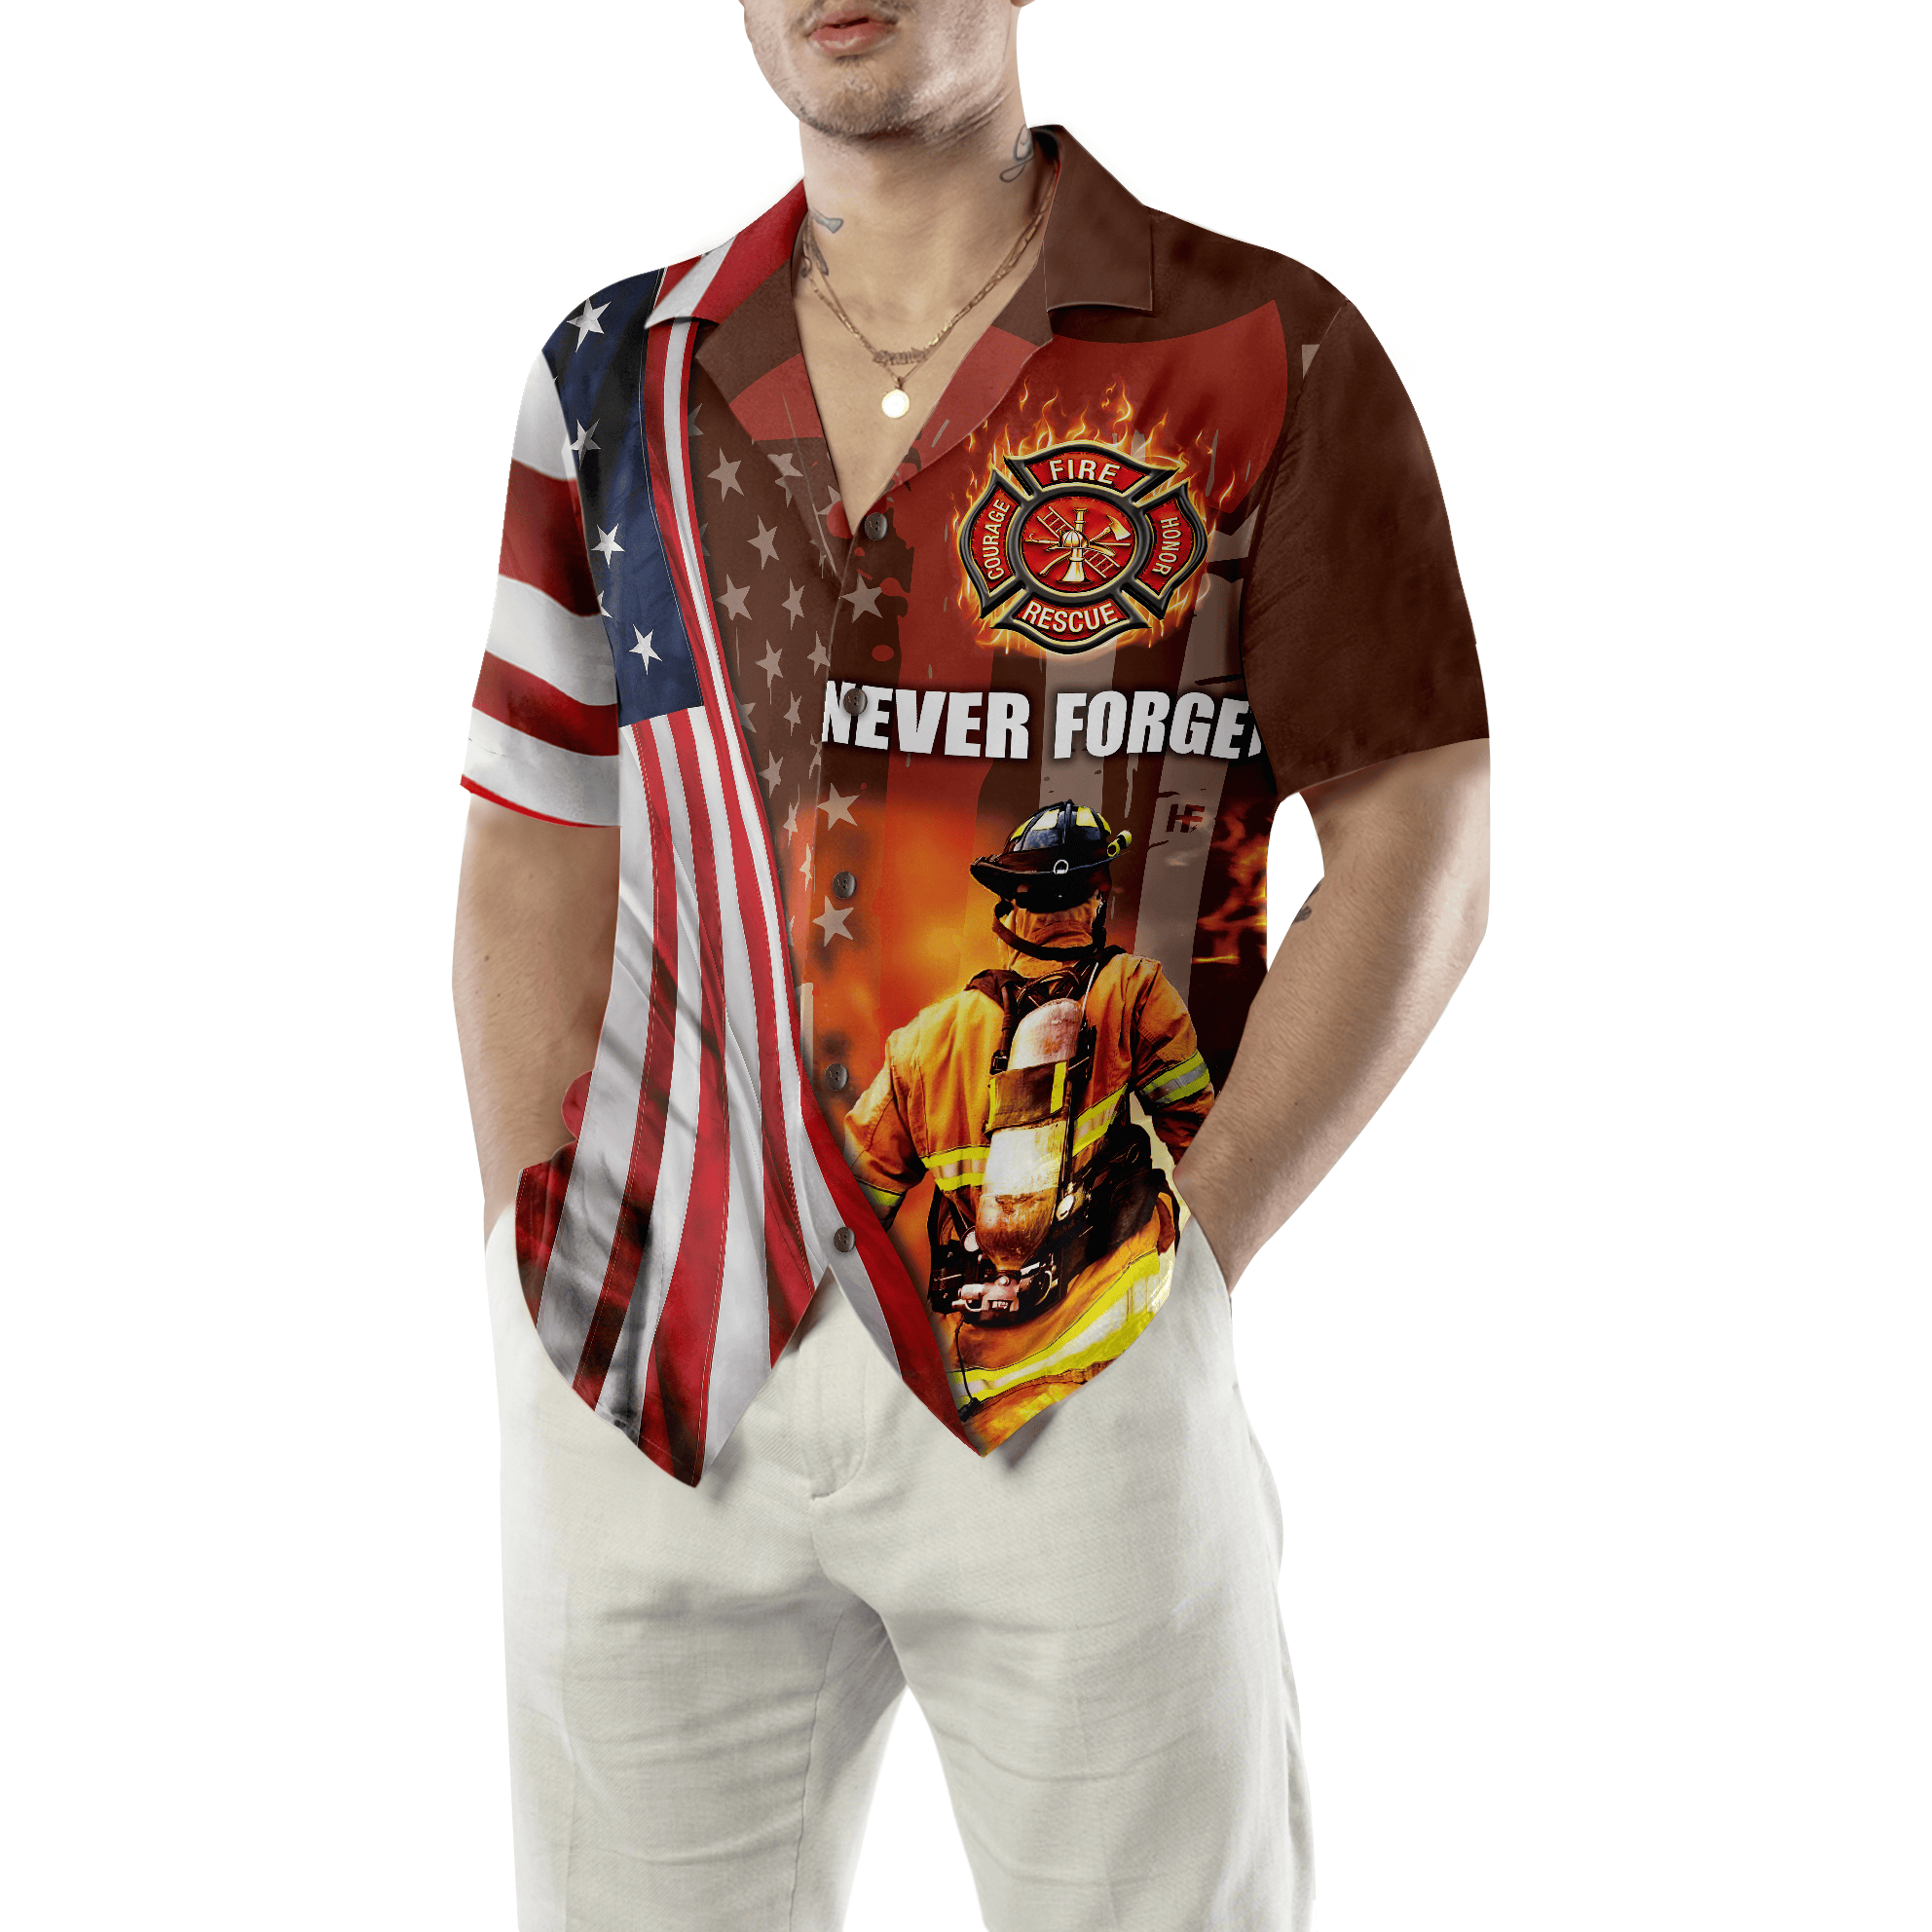 Never Forget Retired Firefighter American Flag Hawaiian Shirt, Red Axe And Logo Proud Firefighter Shirt For Men